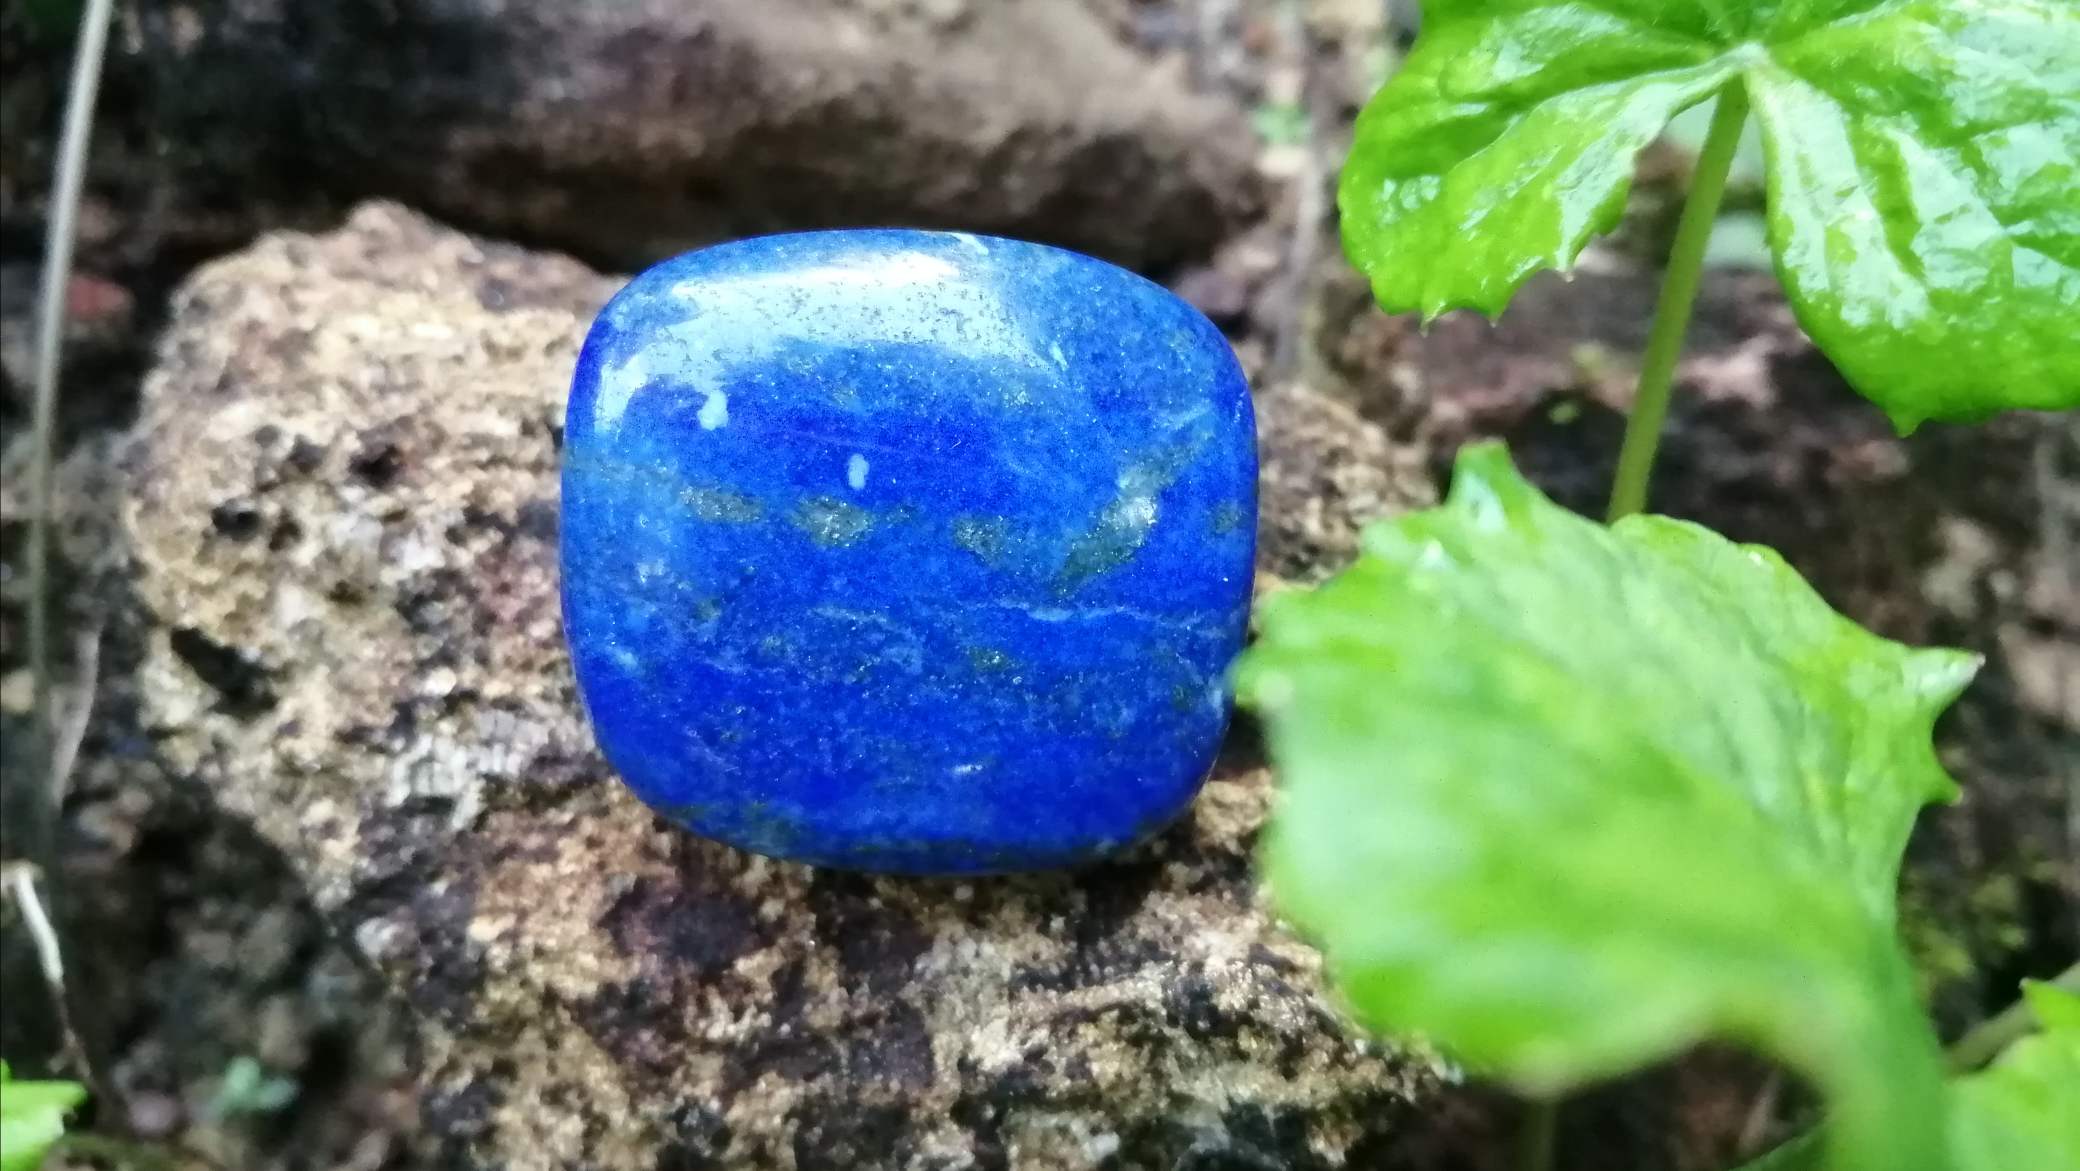 Lapis lazuli is a deep blue metamorphic ( arise from the transformation of existing rock types) rock used as a semi-precious stone, a mixture of minerals with lazurite as the main constituent. Lazurite is a tectosilicate mineral with sulfate, sulfur, and chloride. Lapis lazuli can be found colors such as Blue, or purple, mottled with white calcite and brassy pyrite. As Physical Properties, It has Uneven and Conchoidal fractures and a dull luster. Lapis Lazuli specific gravity is 2.7–2.9 with 5–5.5 hardness according to the Mohs hardness scale. The refractive index is Refractive Index1.500 to 1.670 as optical properties. The variations in composition cause a wide variation in the specific gravity, Refractive index and hardness values. At the end of the Middle Ages, lapis lazuli began to be exported to Europe, where it was ground into a powder and made into ultramarine, the finest and most expensive of all blue pigments. In ancient Egypt, lapis lazuli was a favorite stone for amulets and ornaments such as scarabs. Lapis lazuli is found in Afghanistan, Russia, Chile, Italy, Mongolia, Pakistan, the United States, and Canada. Afghanistan is the major source of lapis lazuli. Healing properties of Lapis lazuli 💎 Lapis lazuli associates with Throat Chakra and Third Eye Chakra. Lapis Lazuli activates the psychic centers at the Third Eye and balances the energies of the Throat Chakra. Also, Lapis lazuli is the September birthstone. Lapis Lazuli releases stress, bringing peace, harmony, and inner self-knowledge.  Lapis Lazuli boosts the immune system, purifies the blood and lowers blood pressure. Lapis is one of the oldest spiritual stones known to man, used by healers, priests and royalty, for power, wisdom and to stimulate psychic abilities and inner vision.